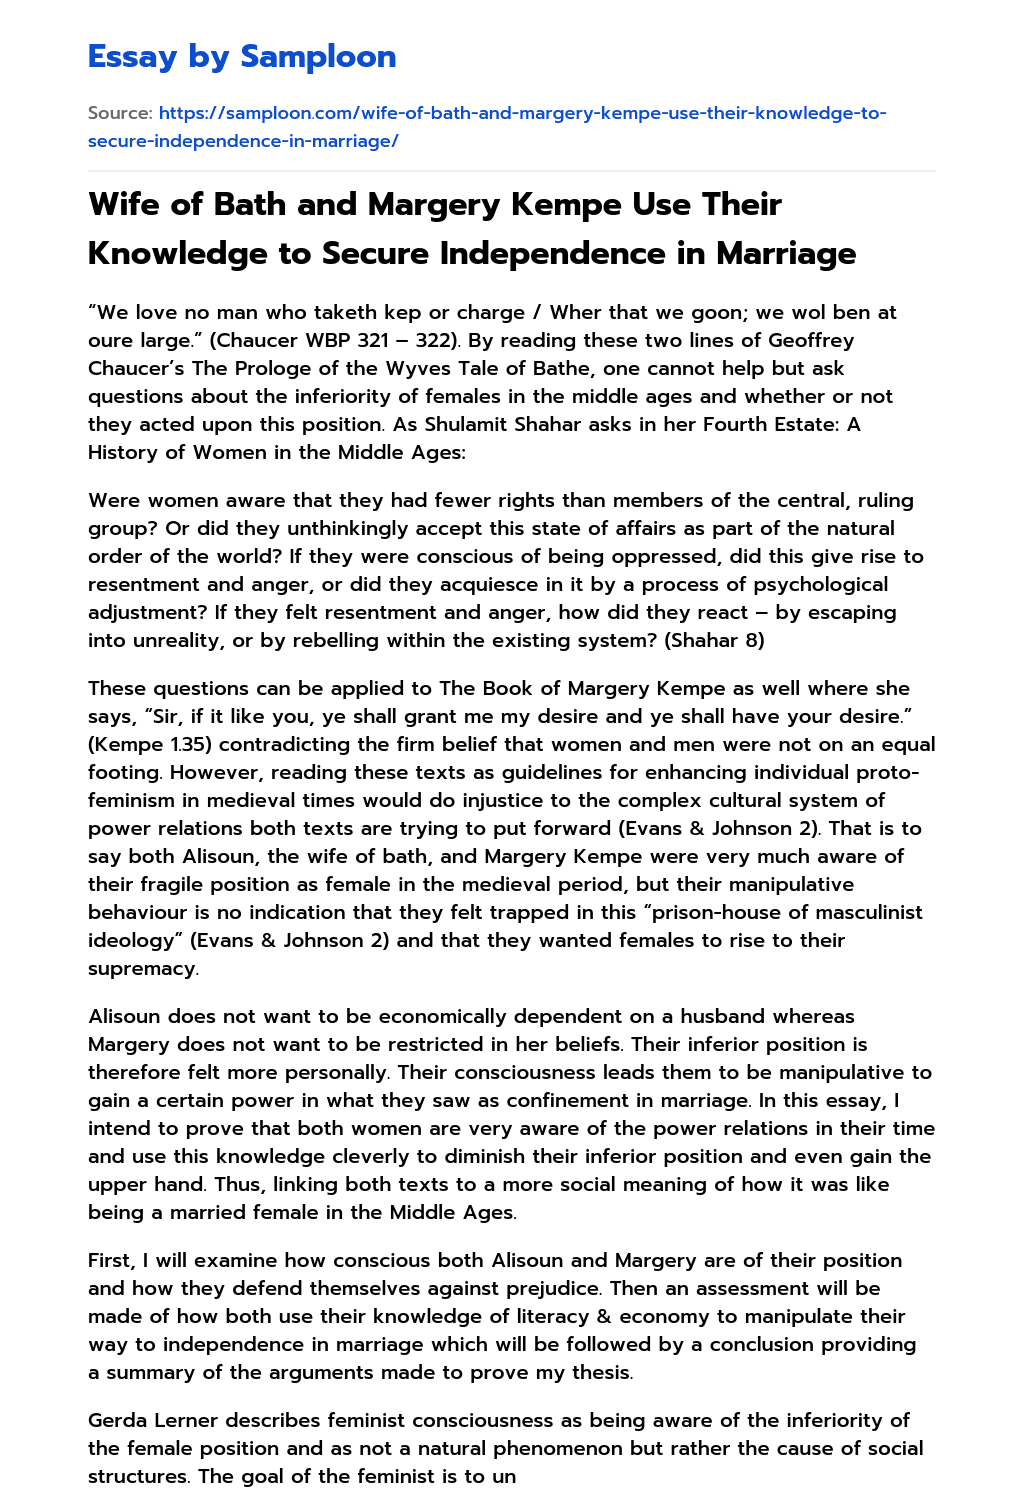 Wife of Bath and Margery Kempe Use Their Knowledge to Secure Independence in Marriage essay